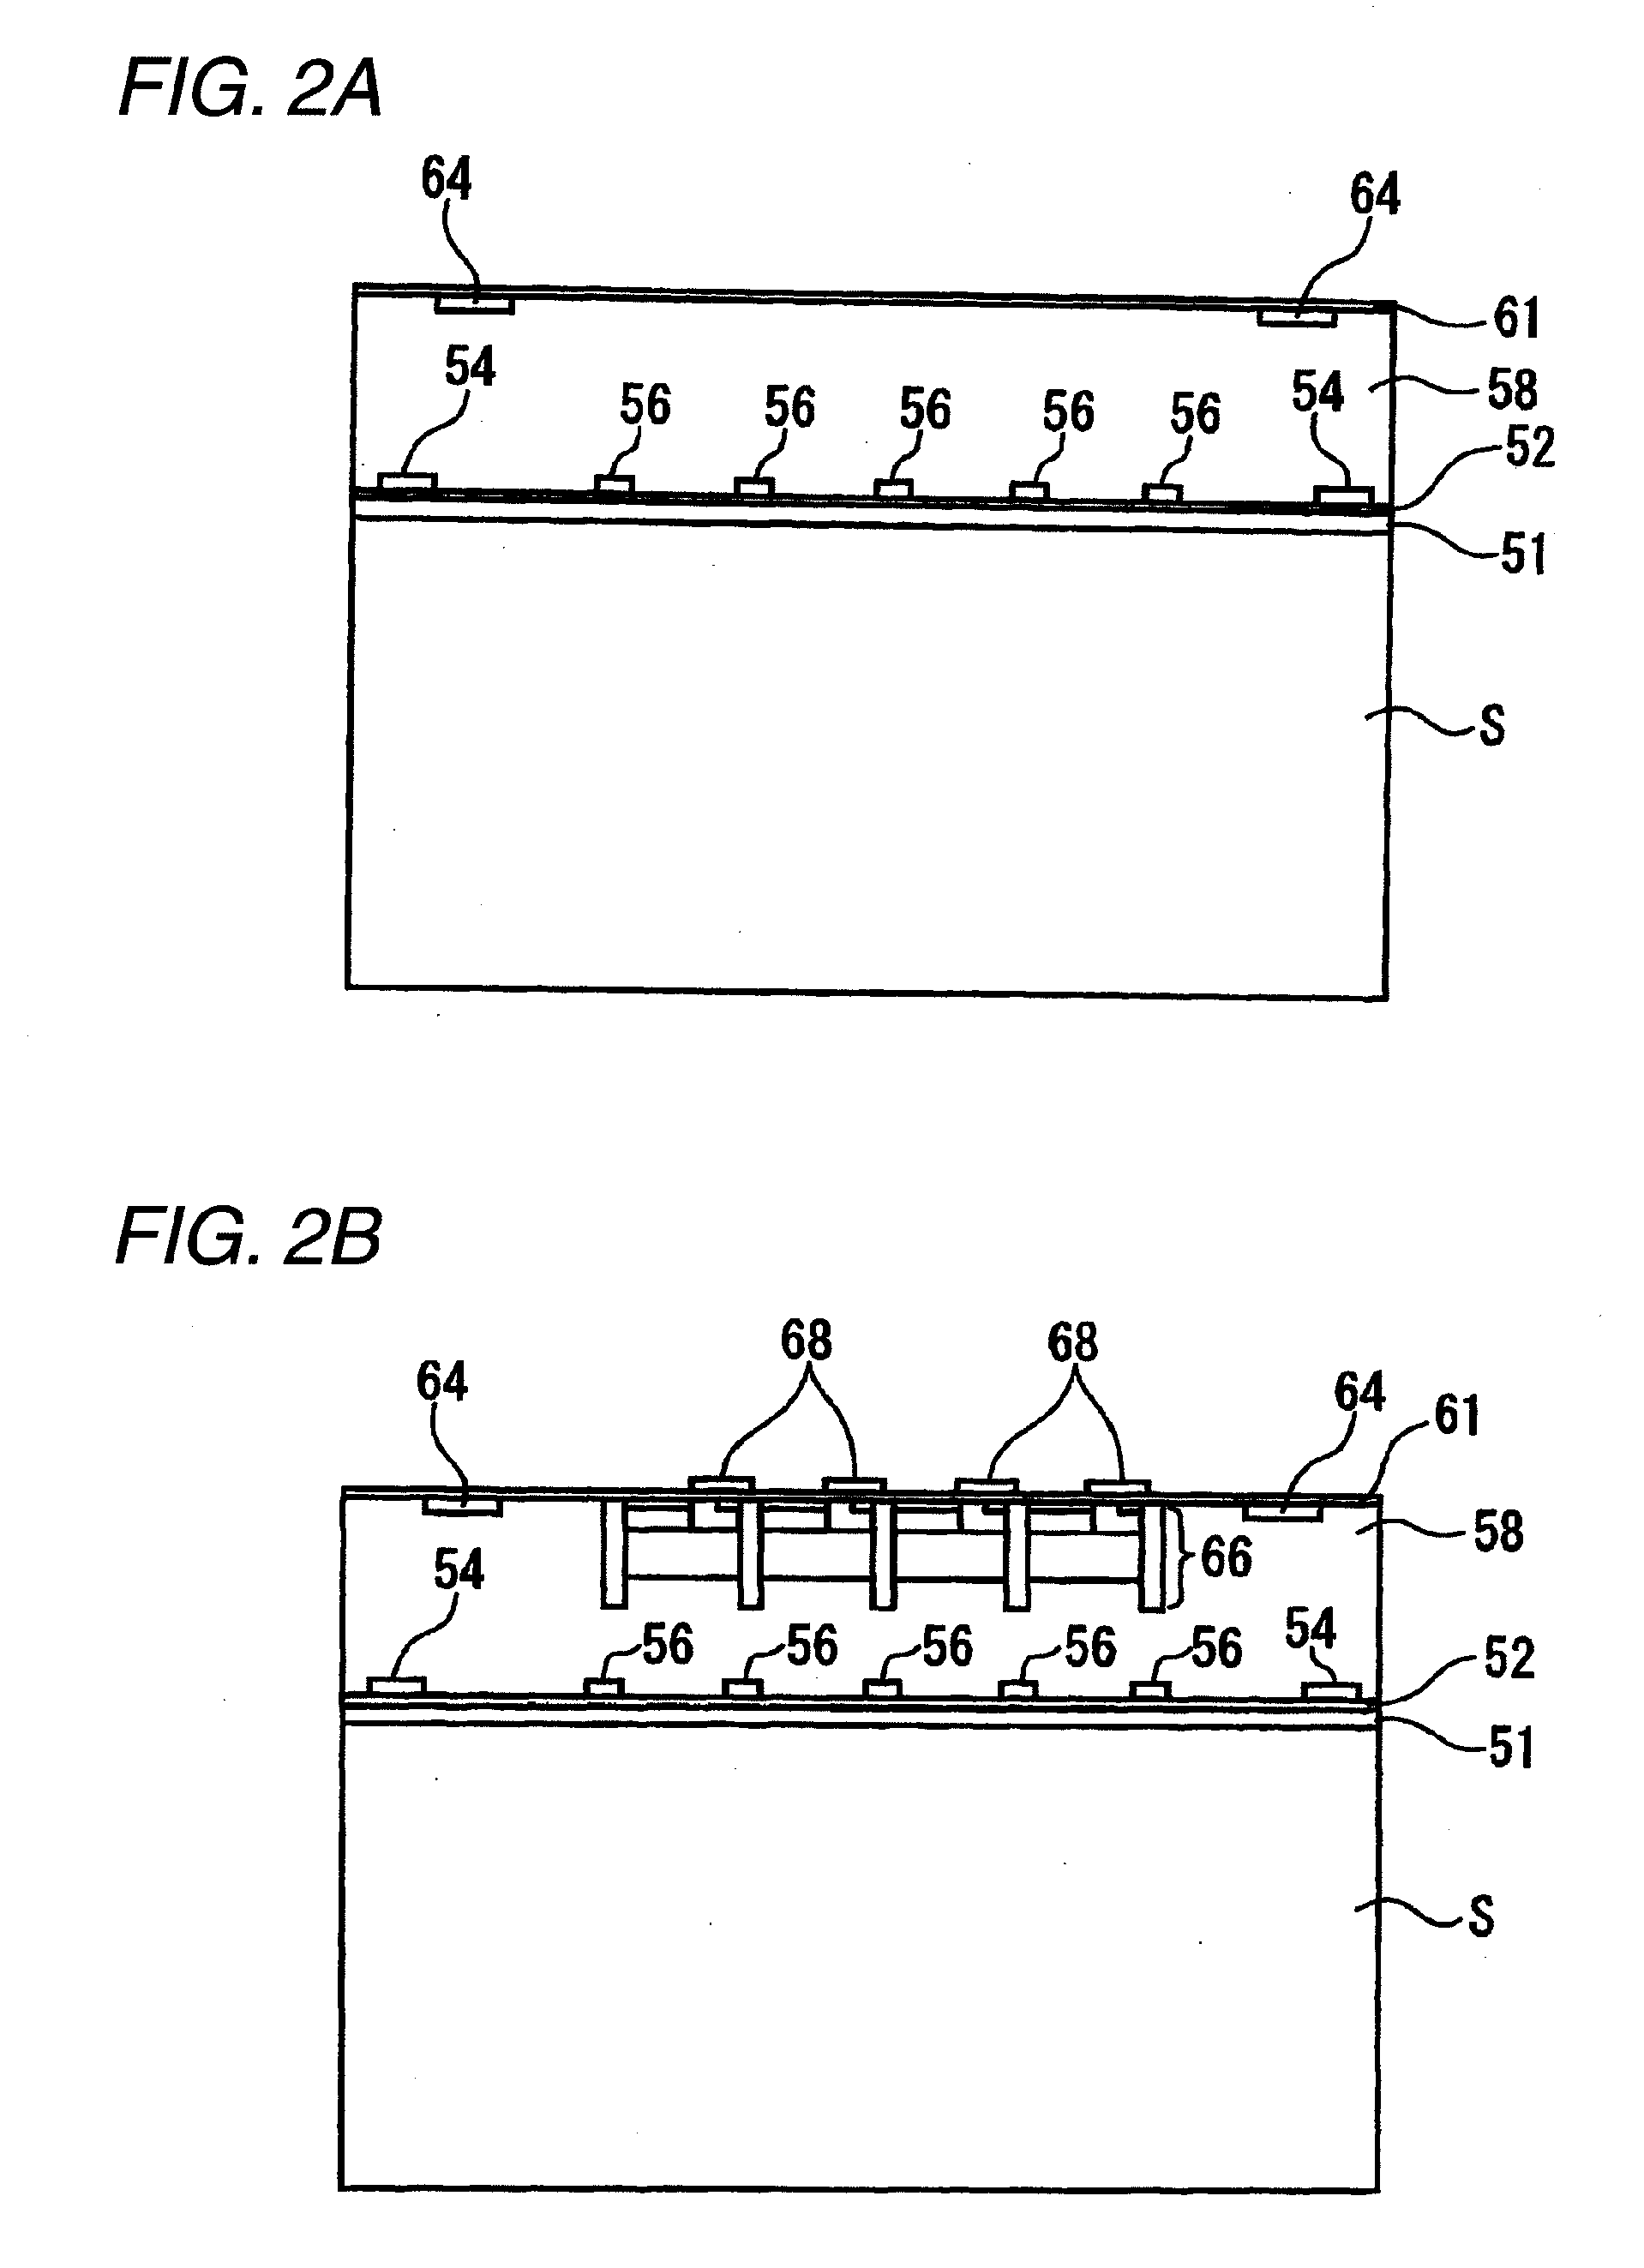 Image pickup device, method of producing image pickup device, and semiconductor substrate for image pickup device